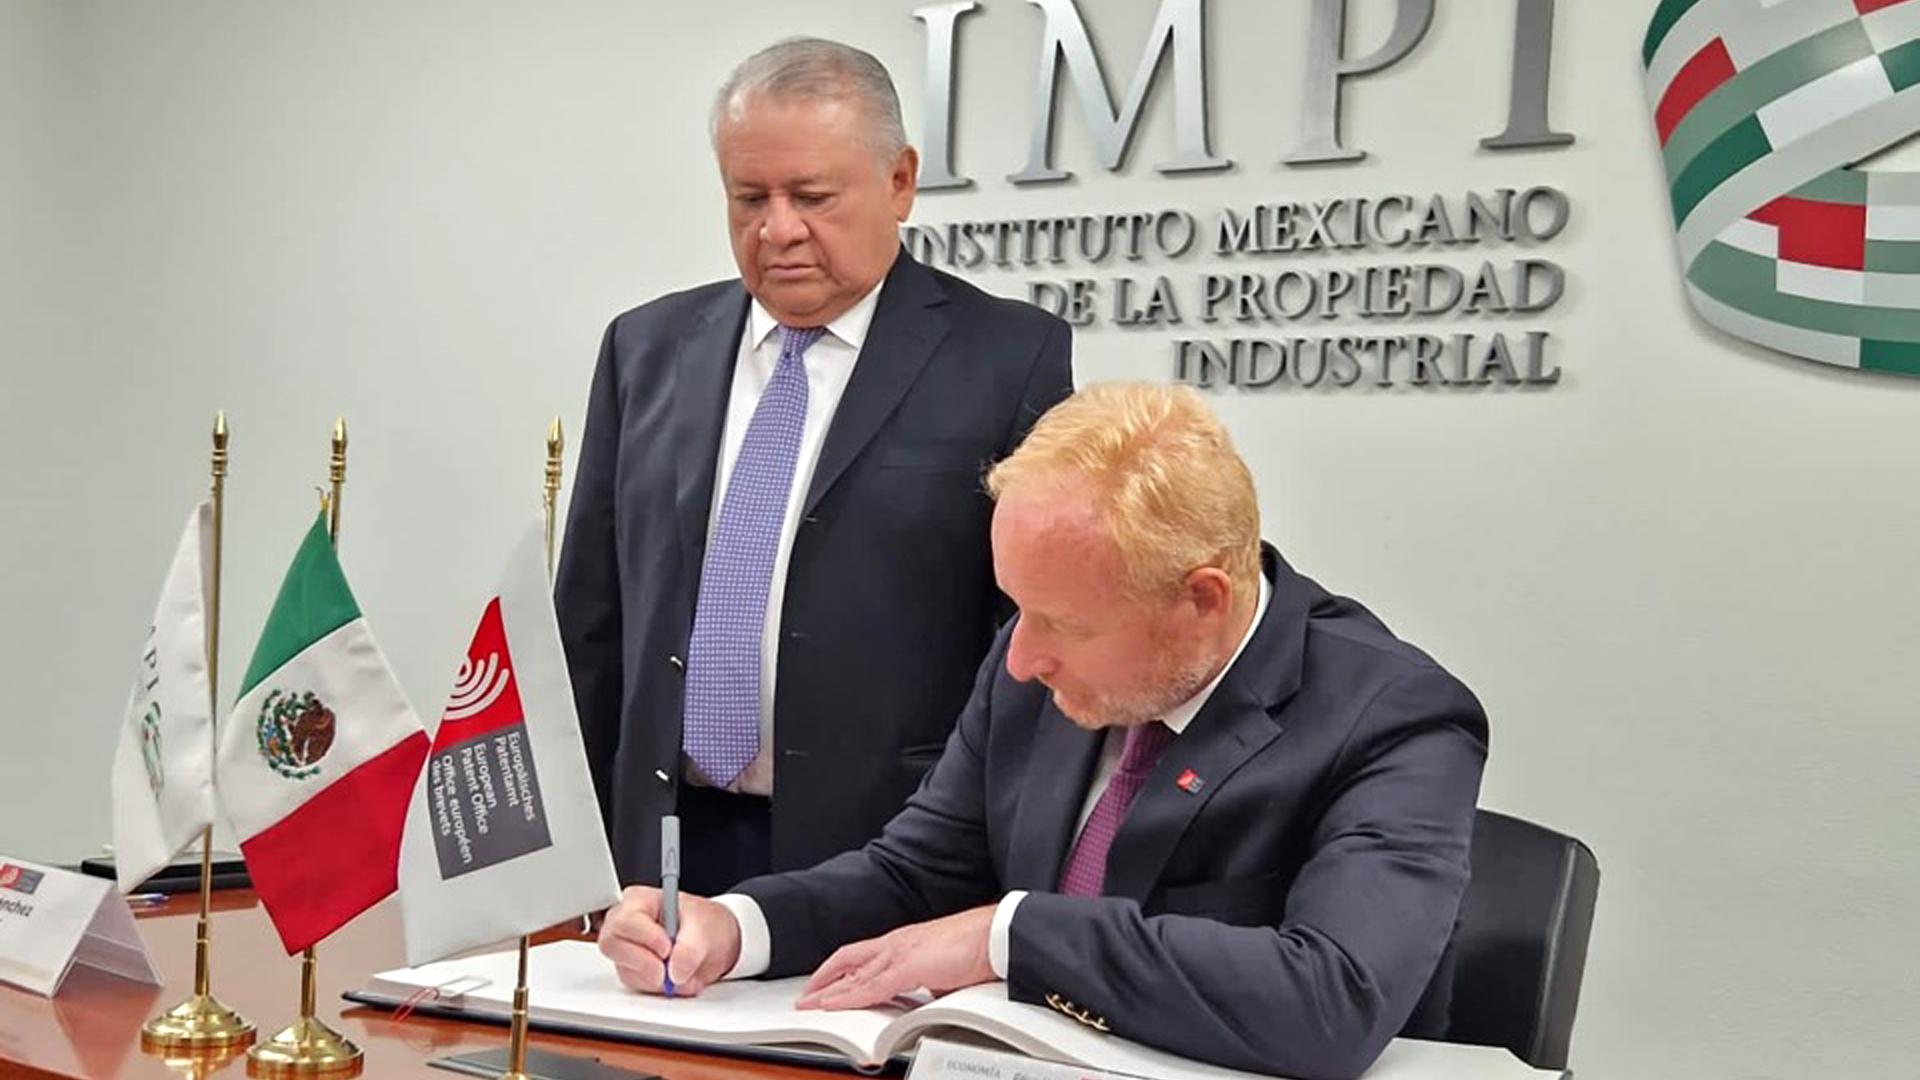 President Campinos and José Sánchez Pérez Director General of the Mexican Institute of Industrial Property (IMPI)